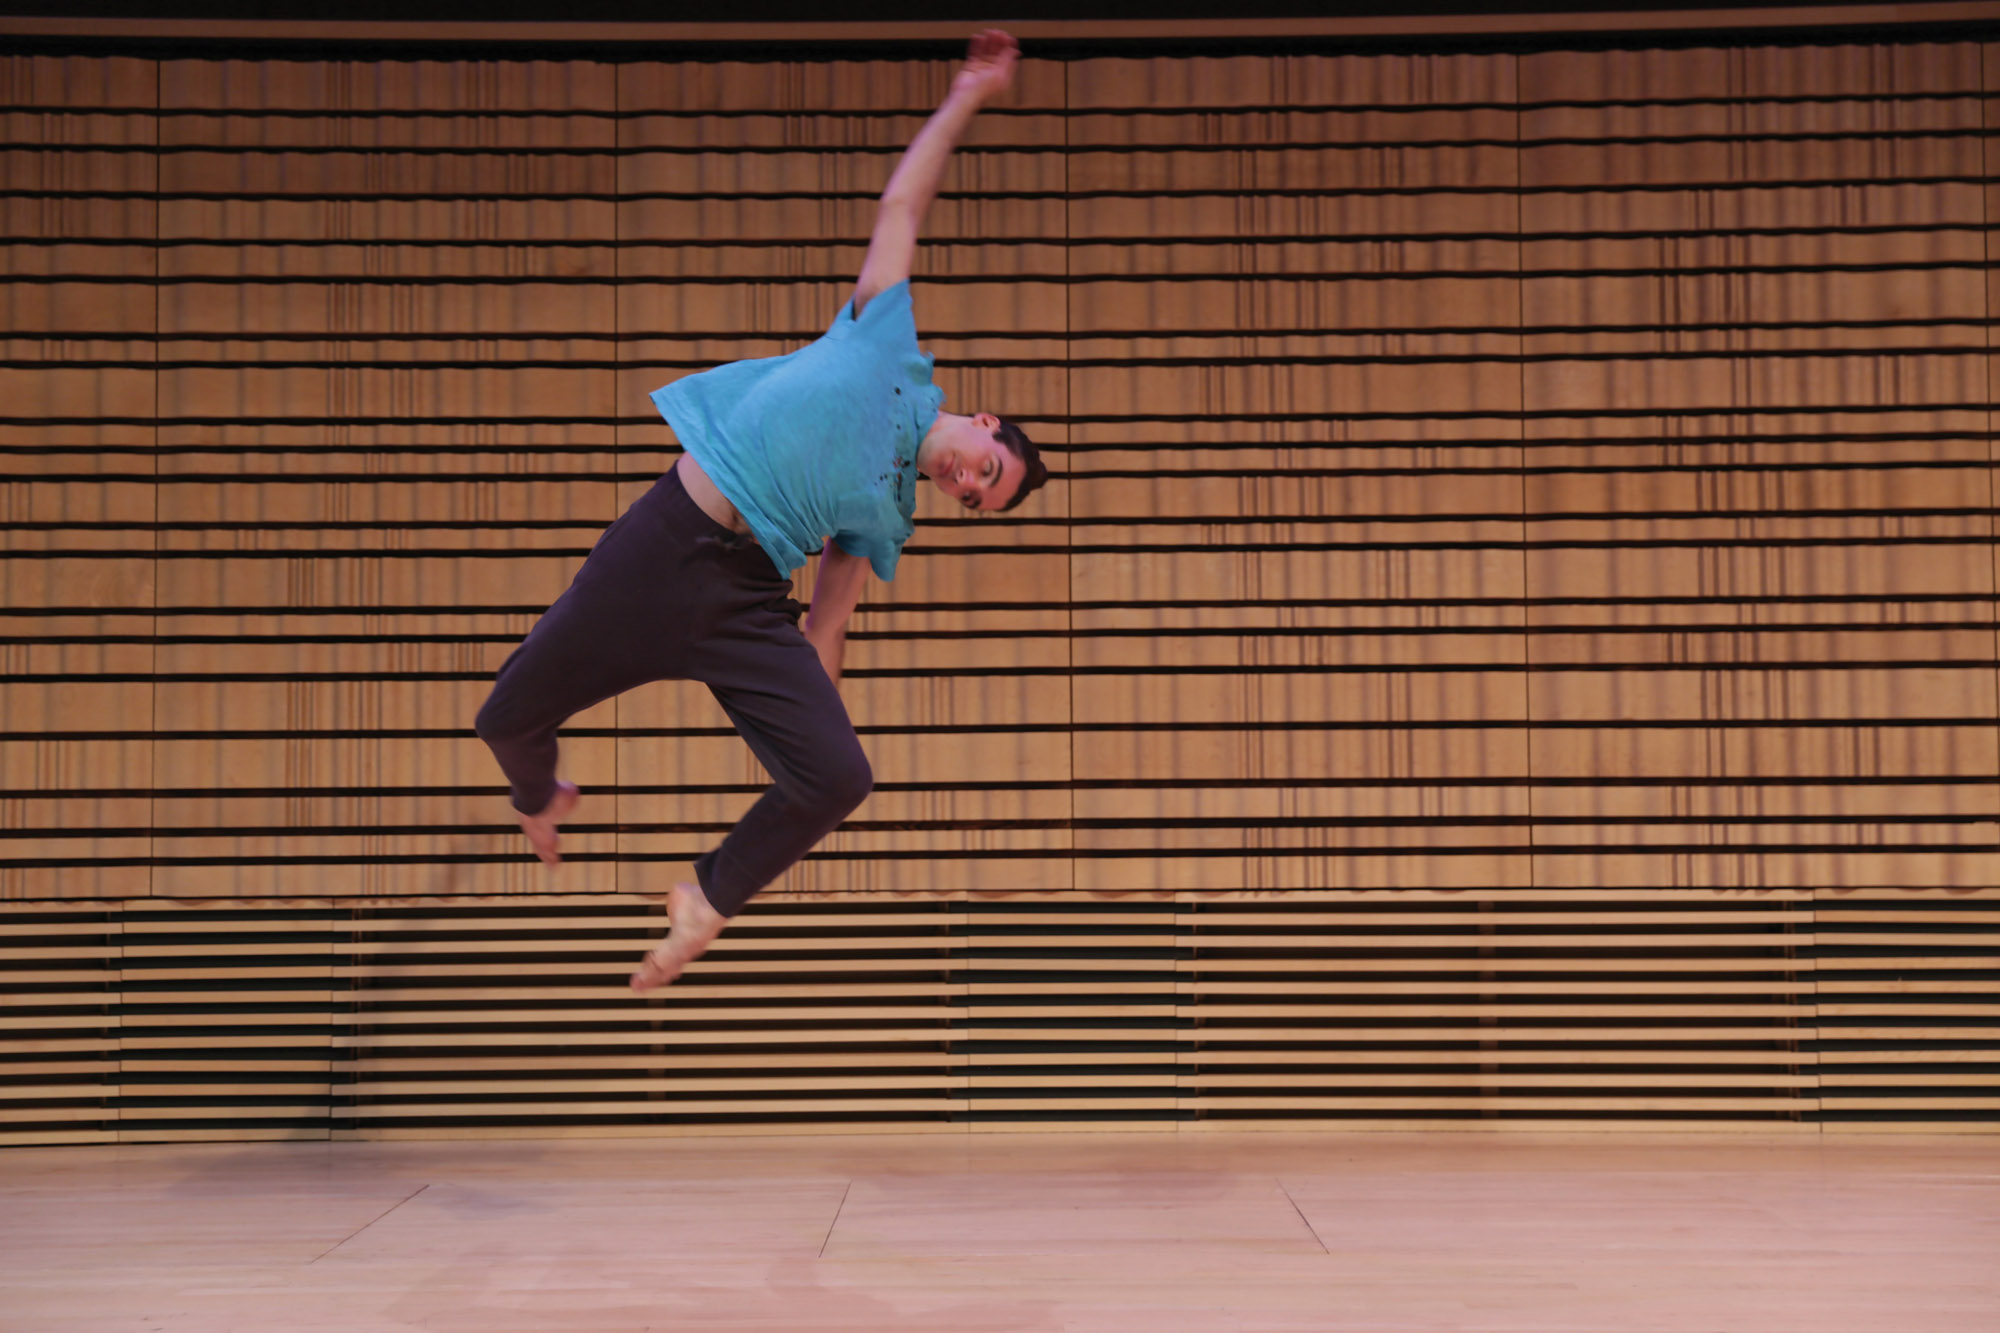 a male dancer wearing a teal top and gray bottoms suspended mid-air after a jump on the concert hall stage. 